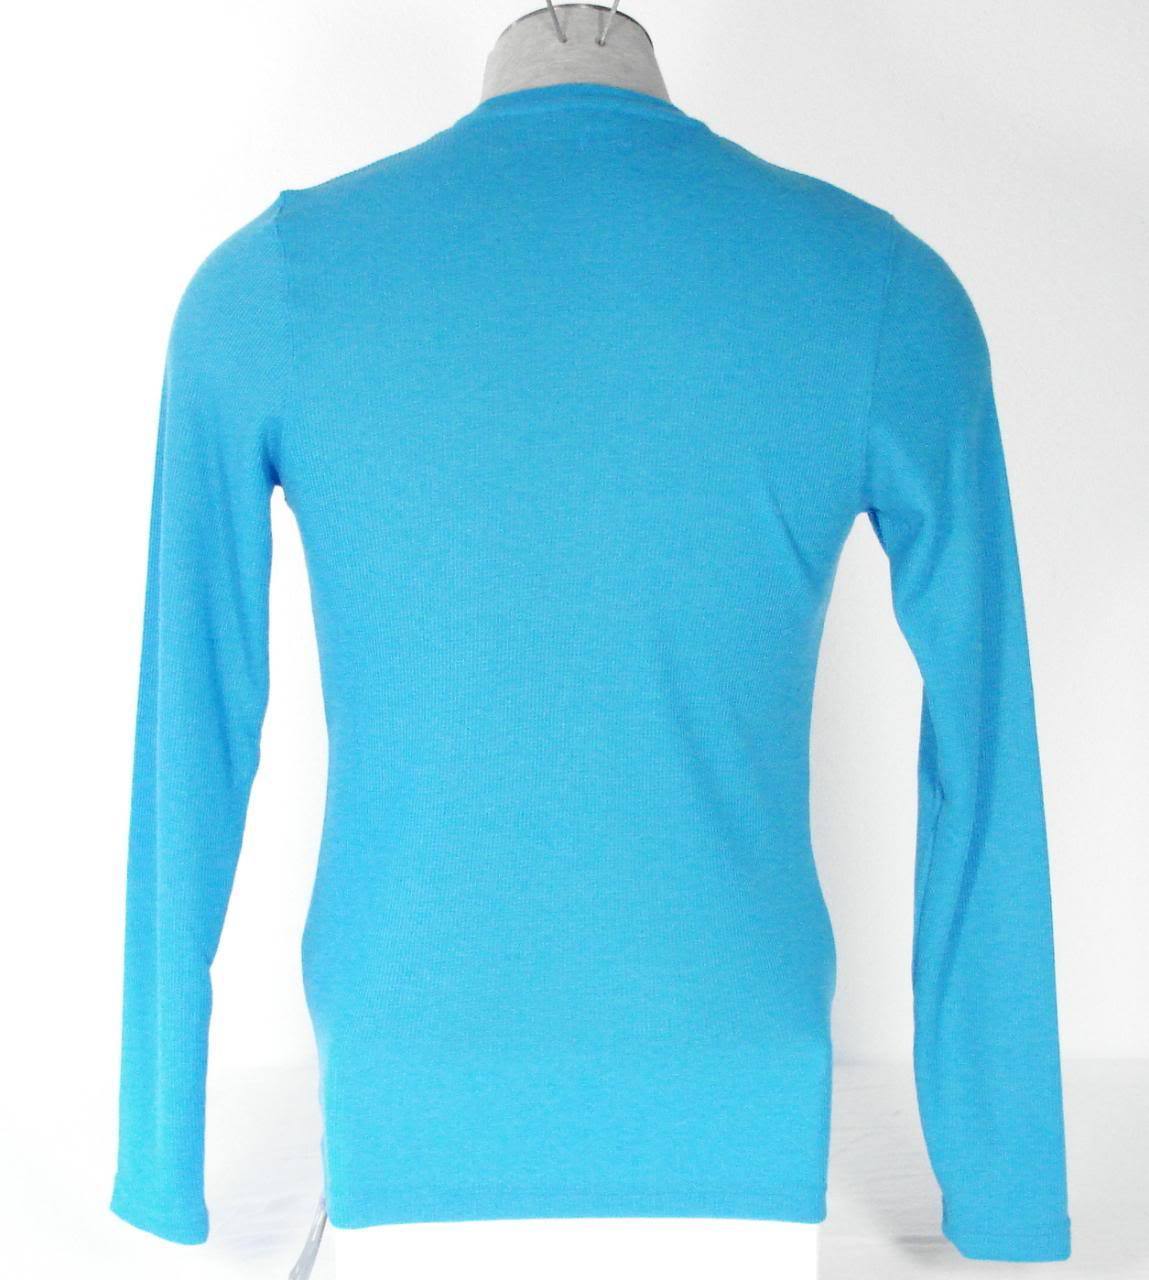 Under Armour Blue Long Sleeve Thermal Shirt Mens Small S NWT - Casual ...